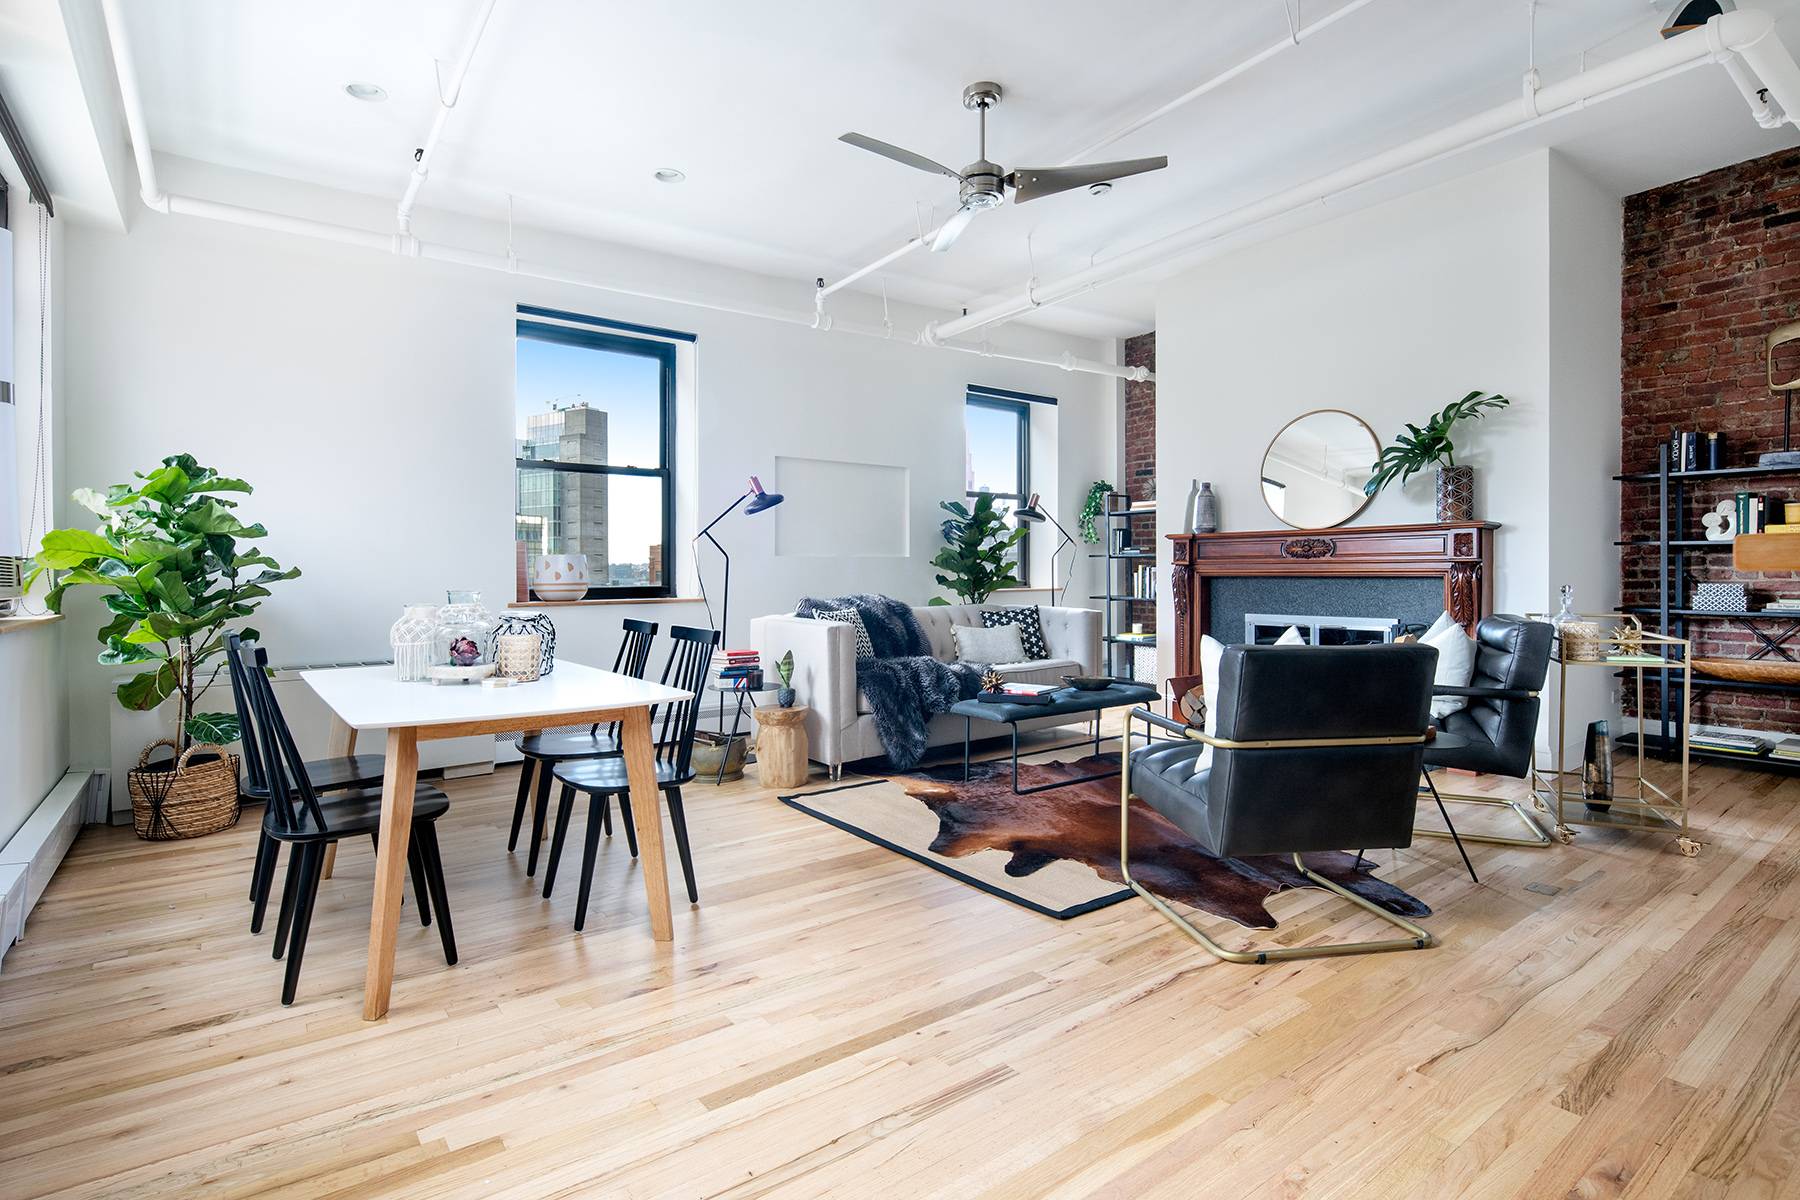 Sublime, quintessential, 2 bedroom, 2 bath penthouse loft, perfectly situated on idyllic Greenwich Street between Charles Street and West 10th Street.